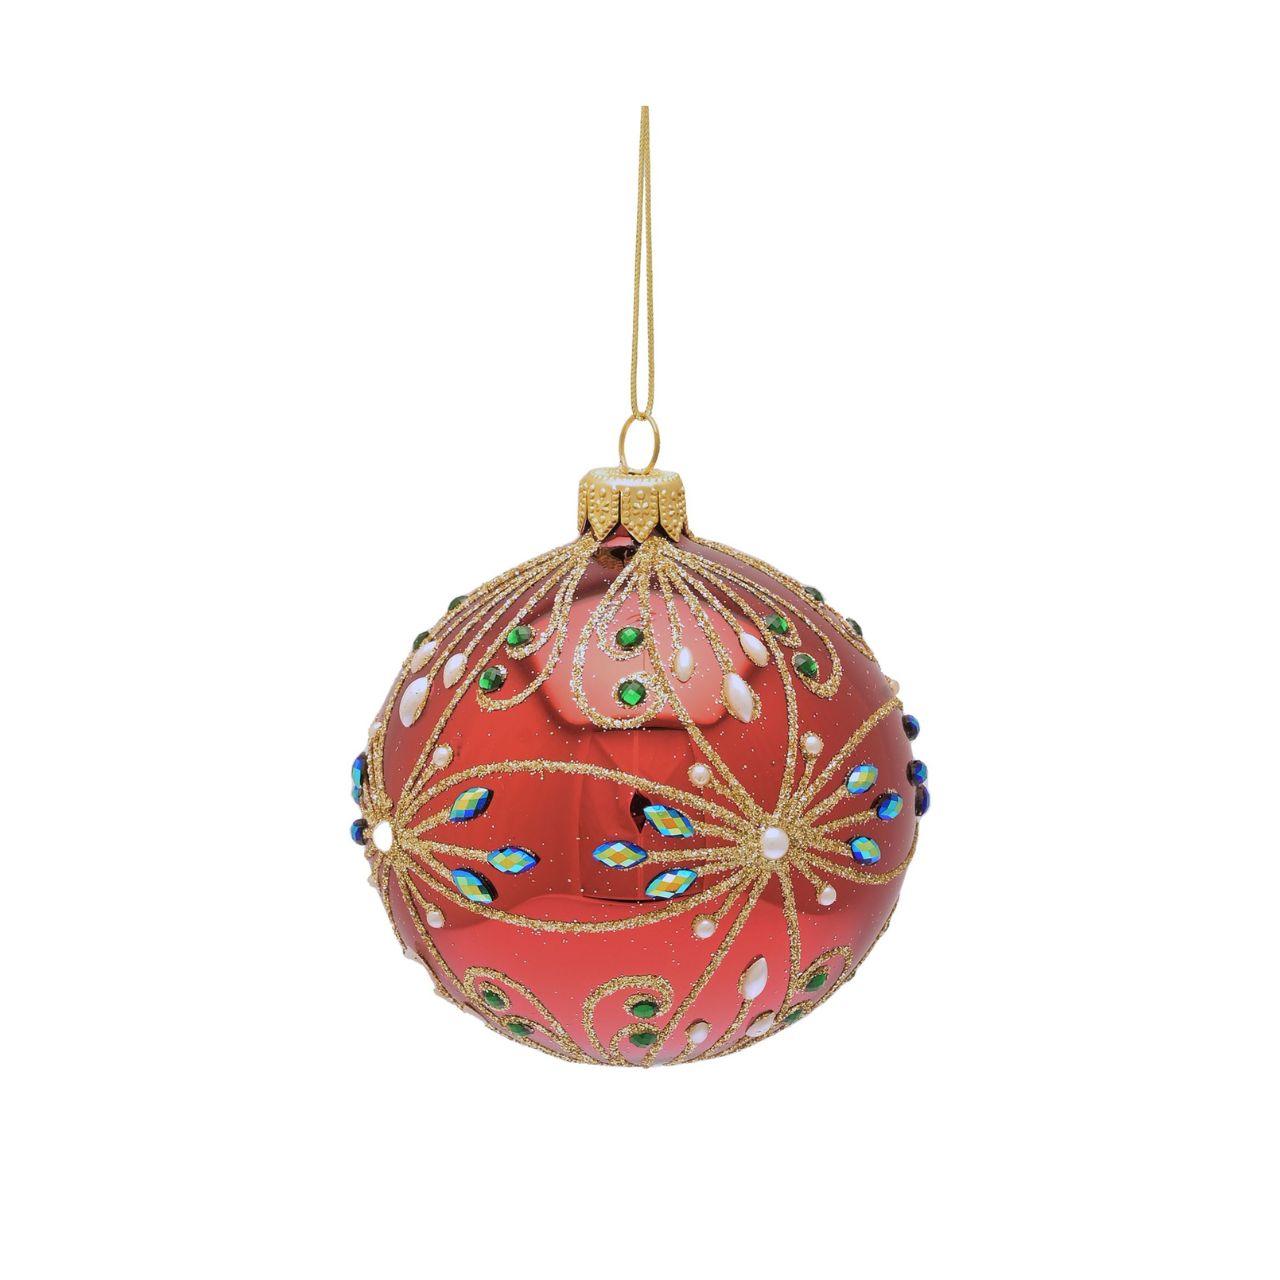 Red Christmas Bauble Floral Design Hand Decorated  A Floral hand decorated red bauble by THE SEASONAL GIFT CO.  This ornate Christmas bauble exudes festive cheer and will stand out amongst the branches on the tree.